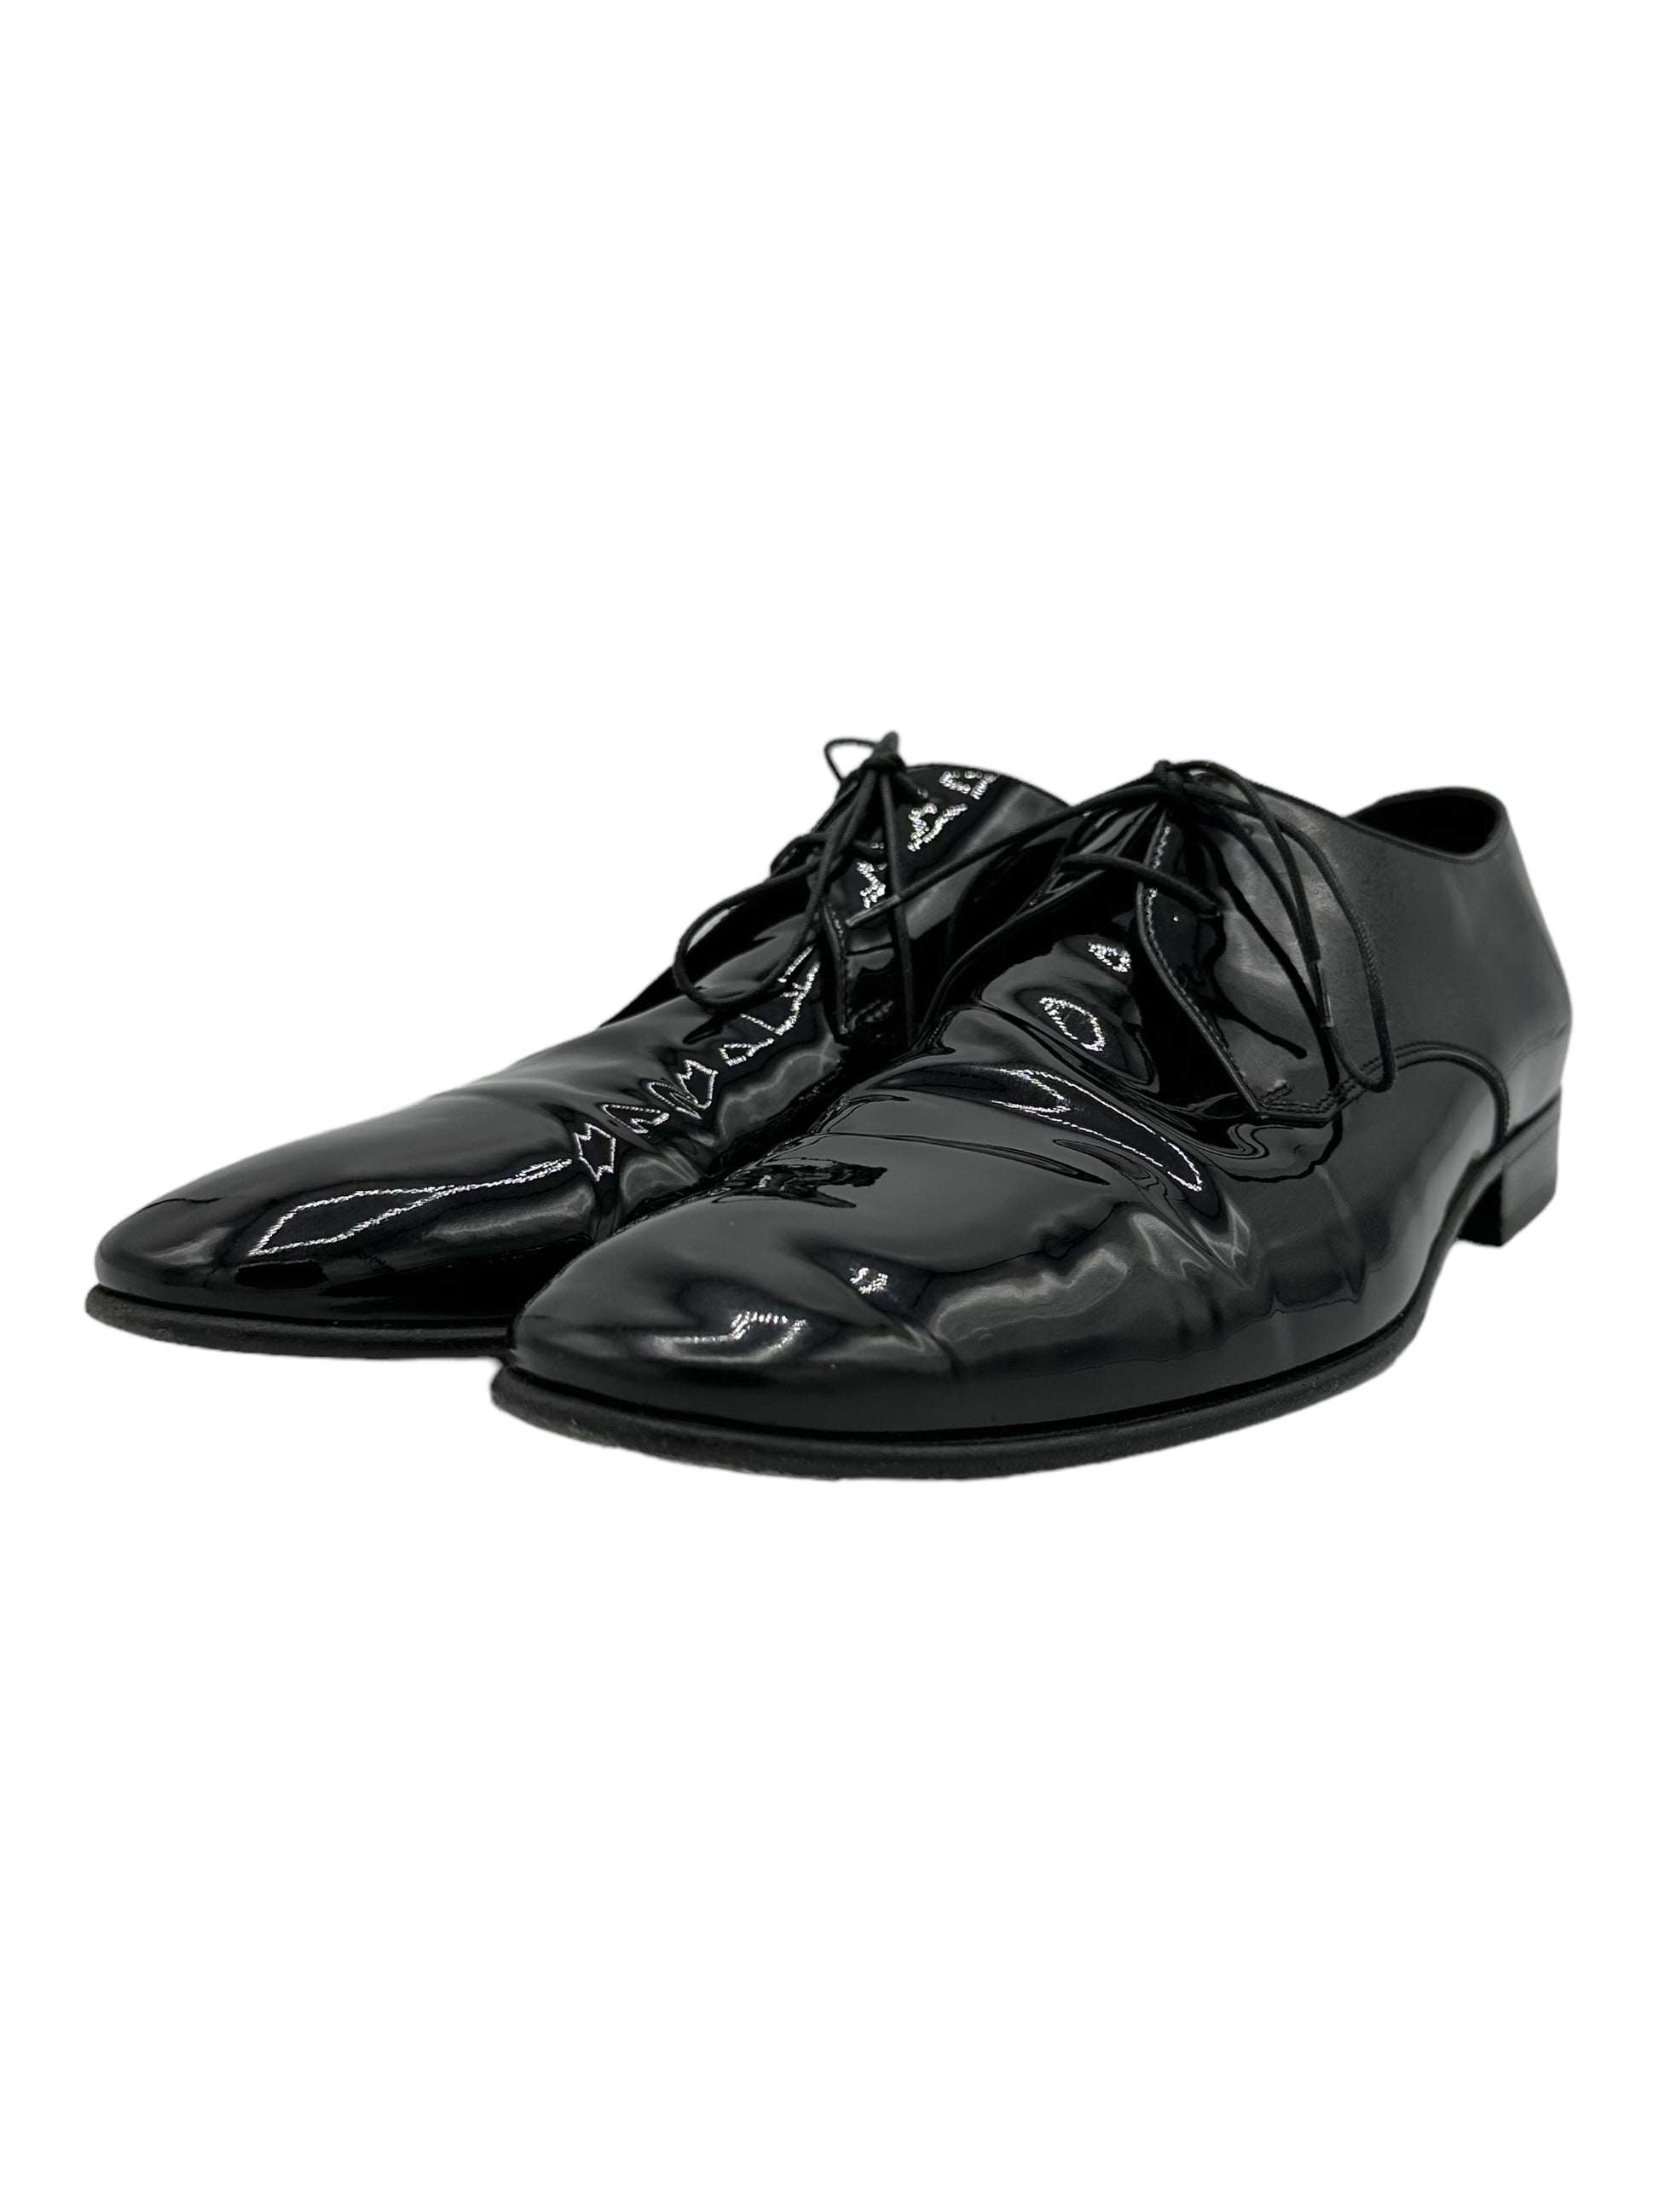 Salvatore Ferragamo Black Leather Derby Dress Shoes - Genuine Design Luxury Consignment for Men. New & Pre-Owned Clothing, Shoes, & Accessories. Calgary, Canada